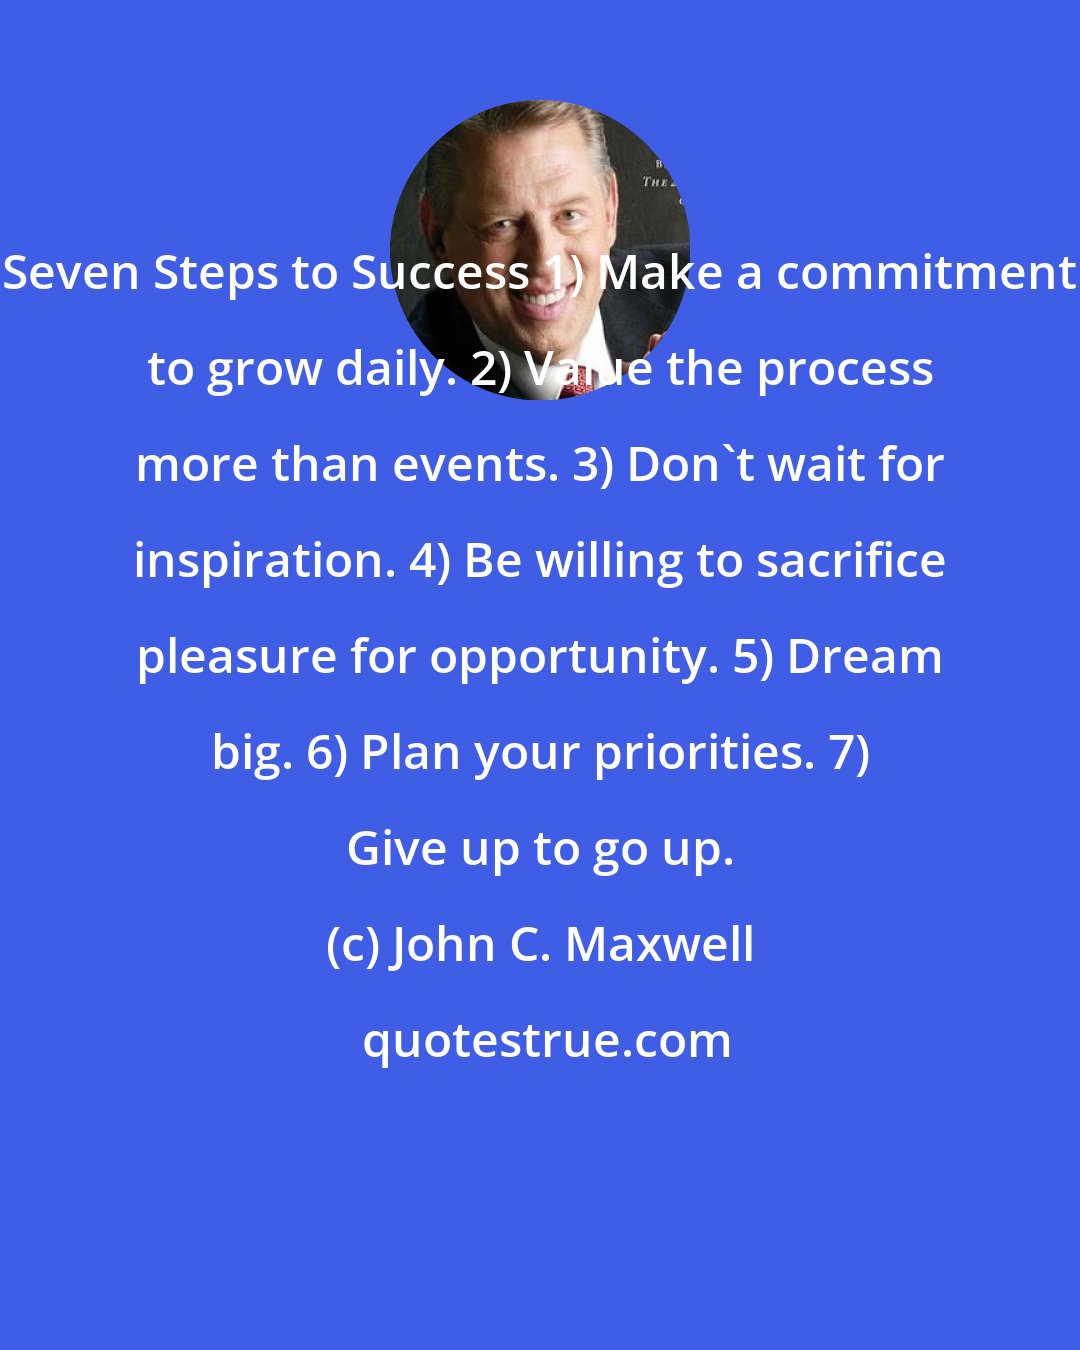 John C. Maxwell: Seven Steps to Success 1) Make a commitment to grow daily. 2) Value the process more than events. 3) Don't wait for inspiration. 4) Be willing to sacrifice pleasure for opportunity. 5) Dream big. 6) Plan your priorities. 7) Give up to go up.